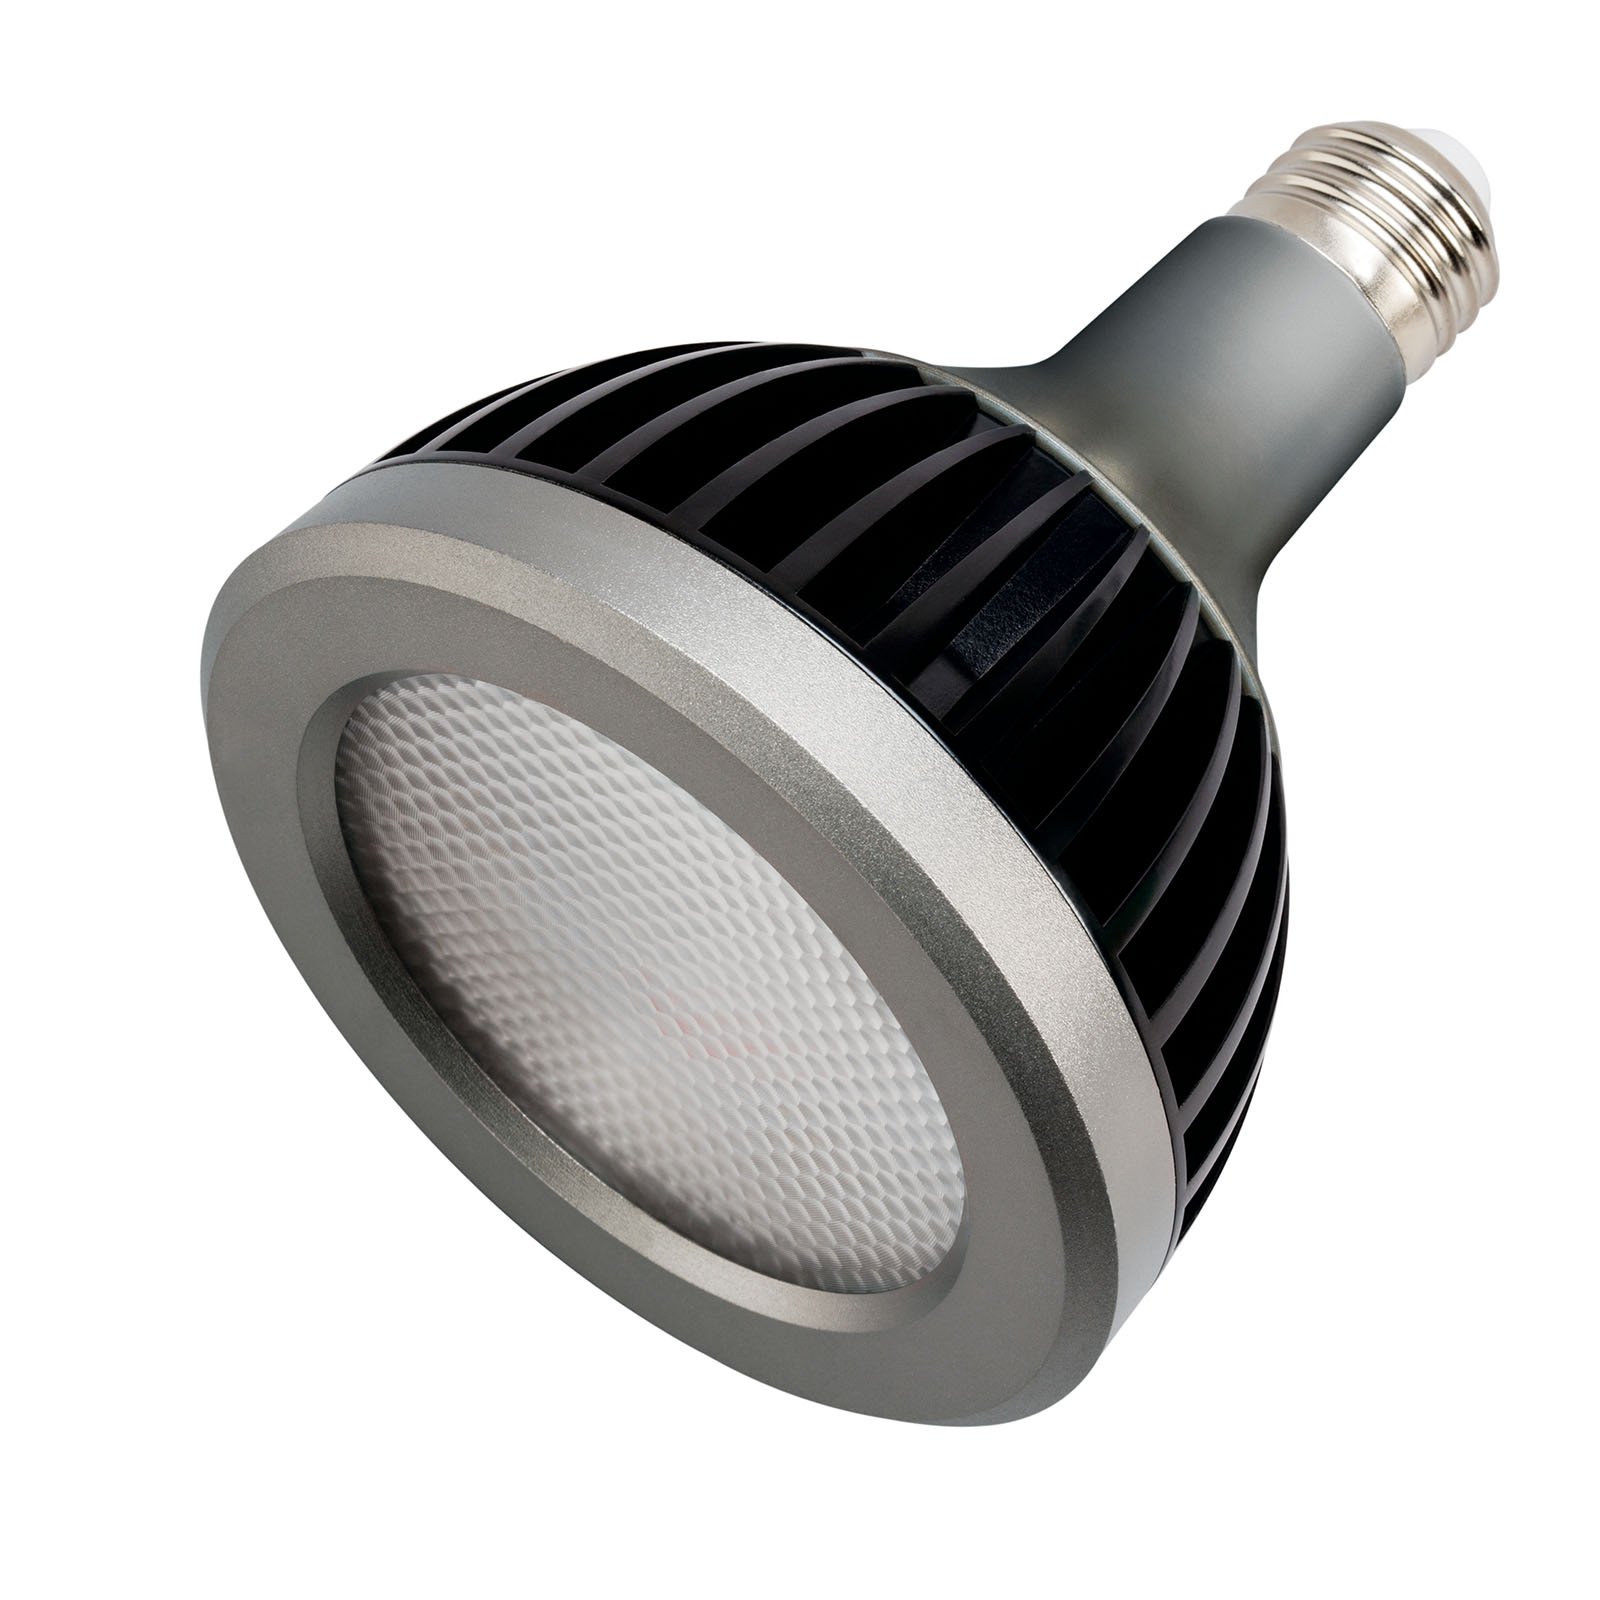 This wet location long neck PAR30 120V-277V LED lamp compares to the 50W Halogen. Featuring a 3000K pure white temperature, this lamp puts forth a 40-degree flood beam spread angle.